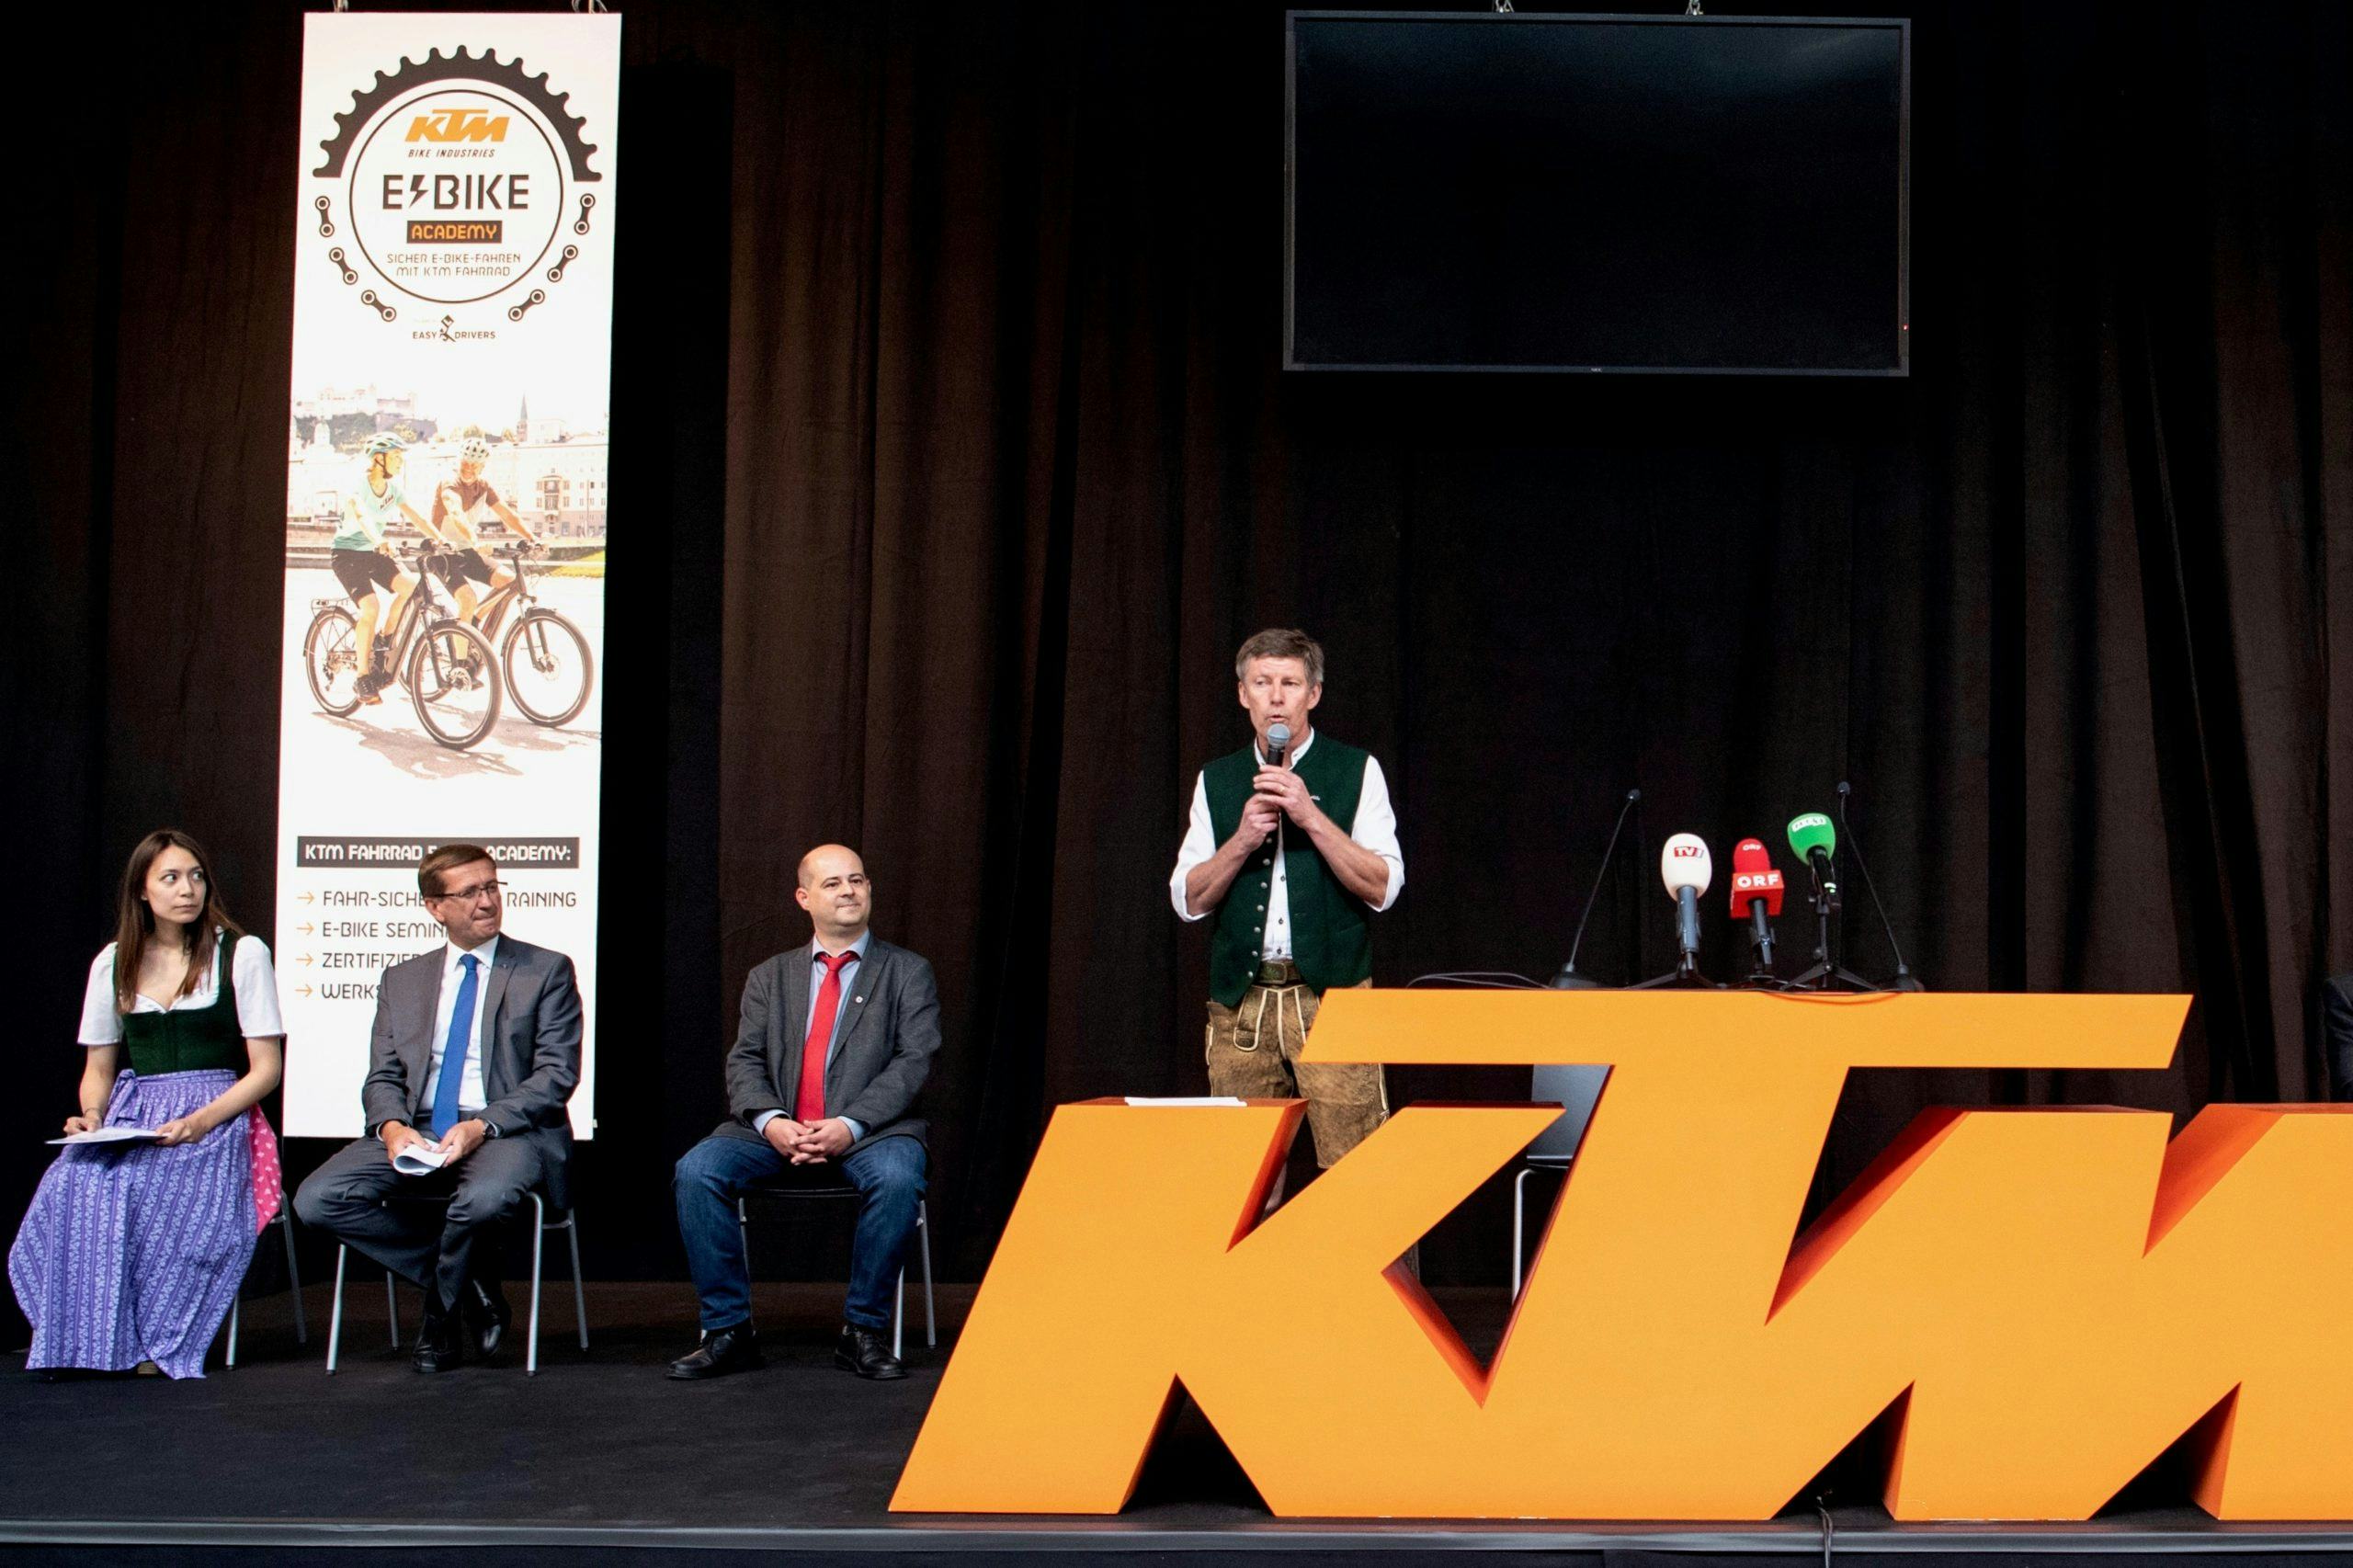 Managing Directors Johann Urkauf (seated left) and Stefan Limbrunner (standing centre) communicated a clear commitment to the KTM Fahrrad location in Upper Austria. - Photo KTM Fahrrad